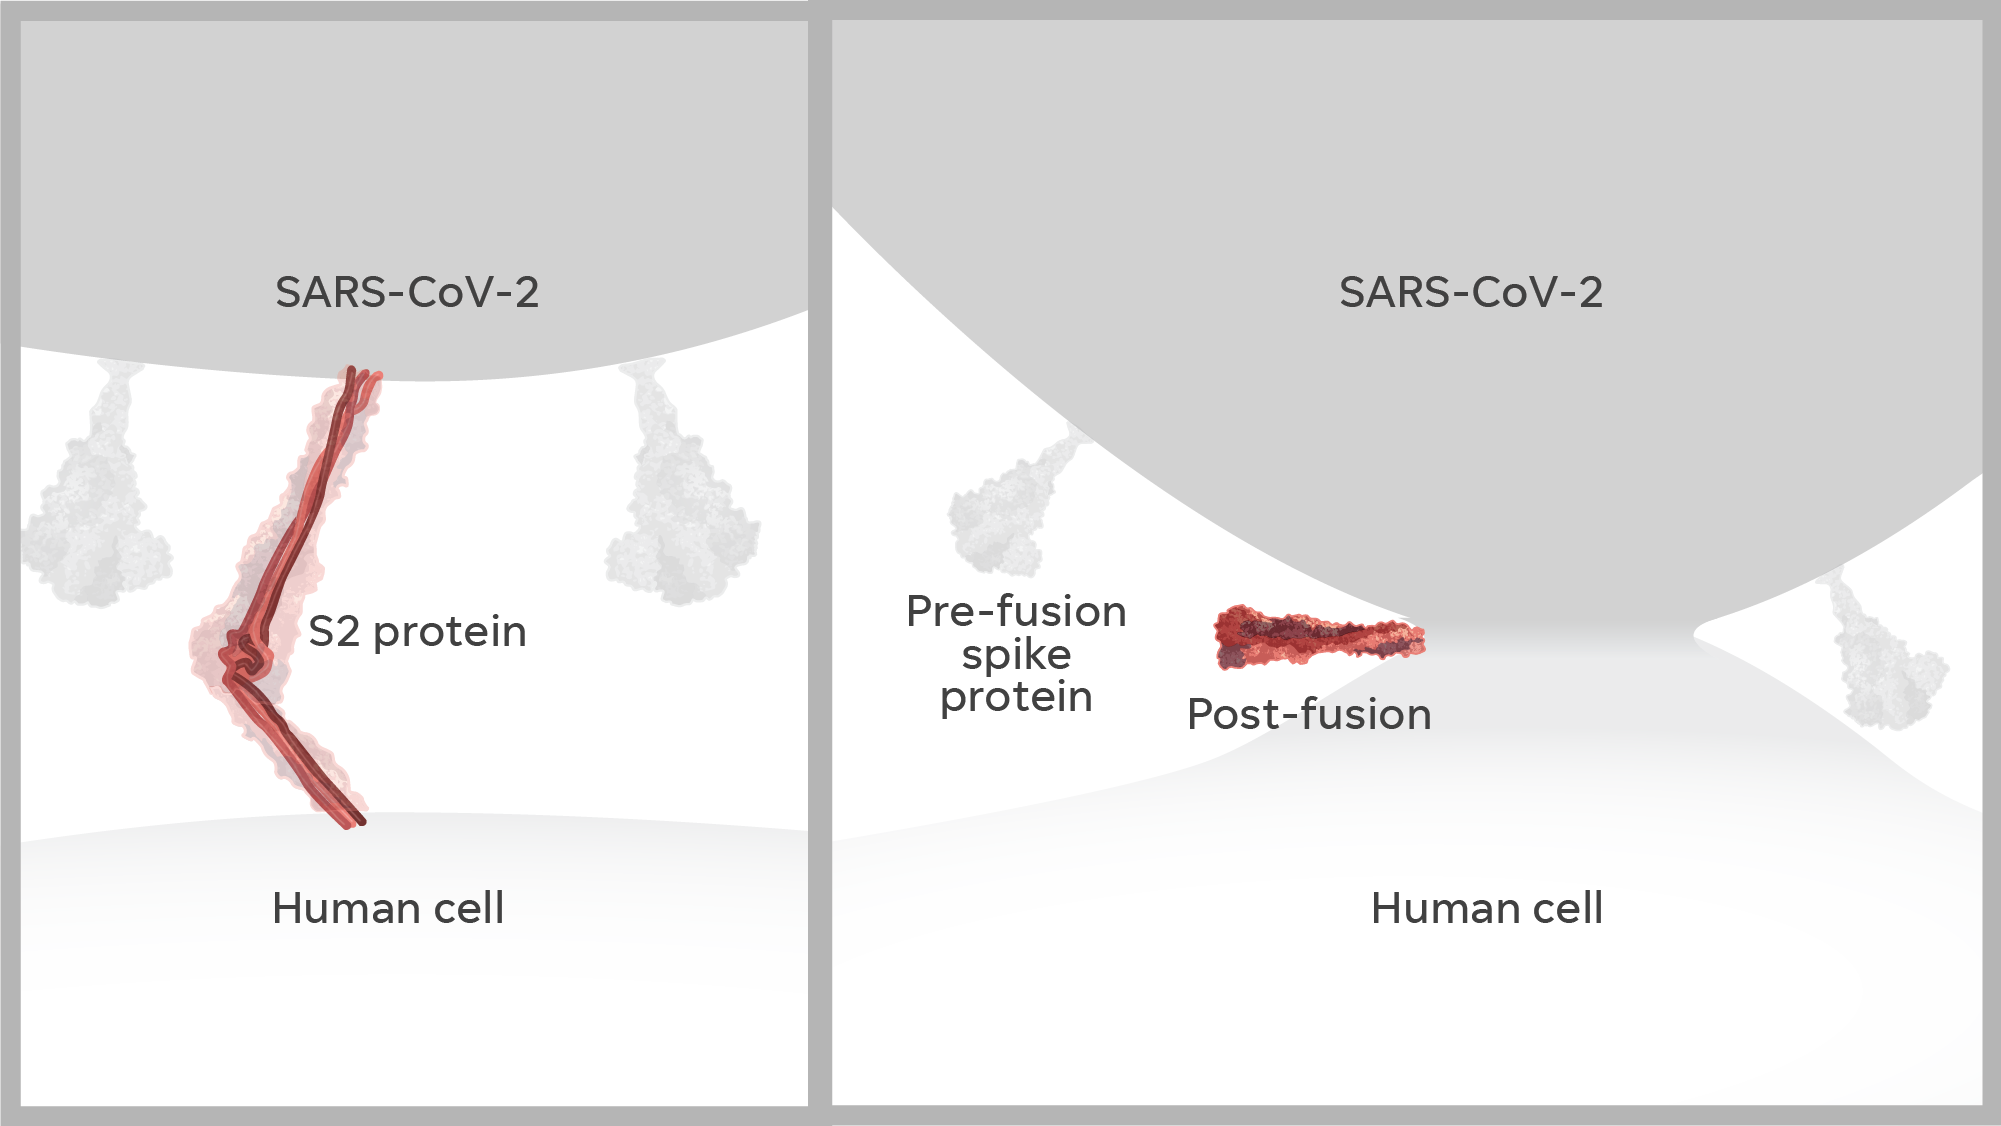 The S2 protein collapses down onto itself, pulling the two membranes together. After that fusion, the protein changes form and creates a pore that allows the virus to enter the cell.